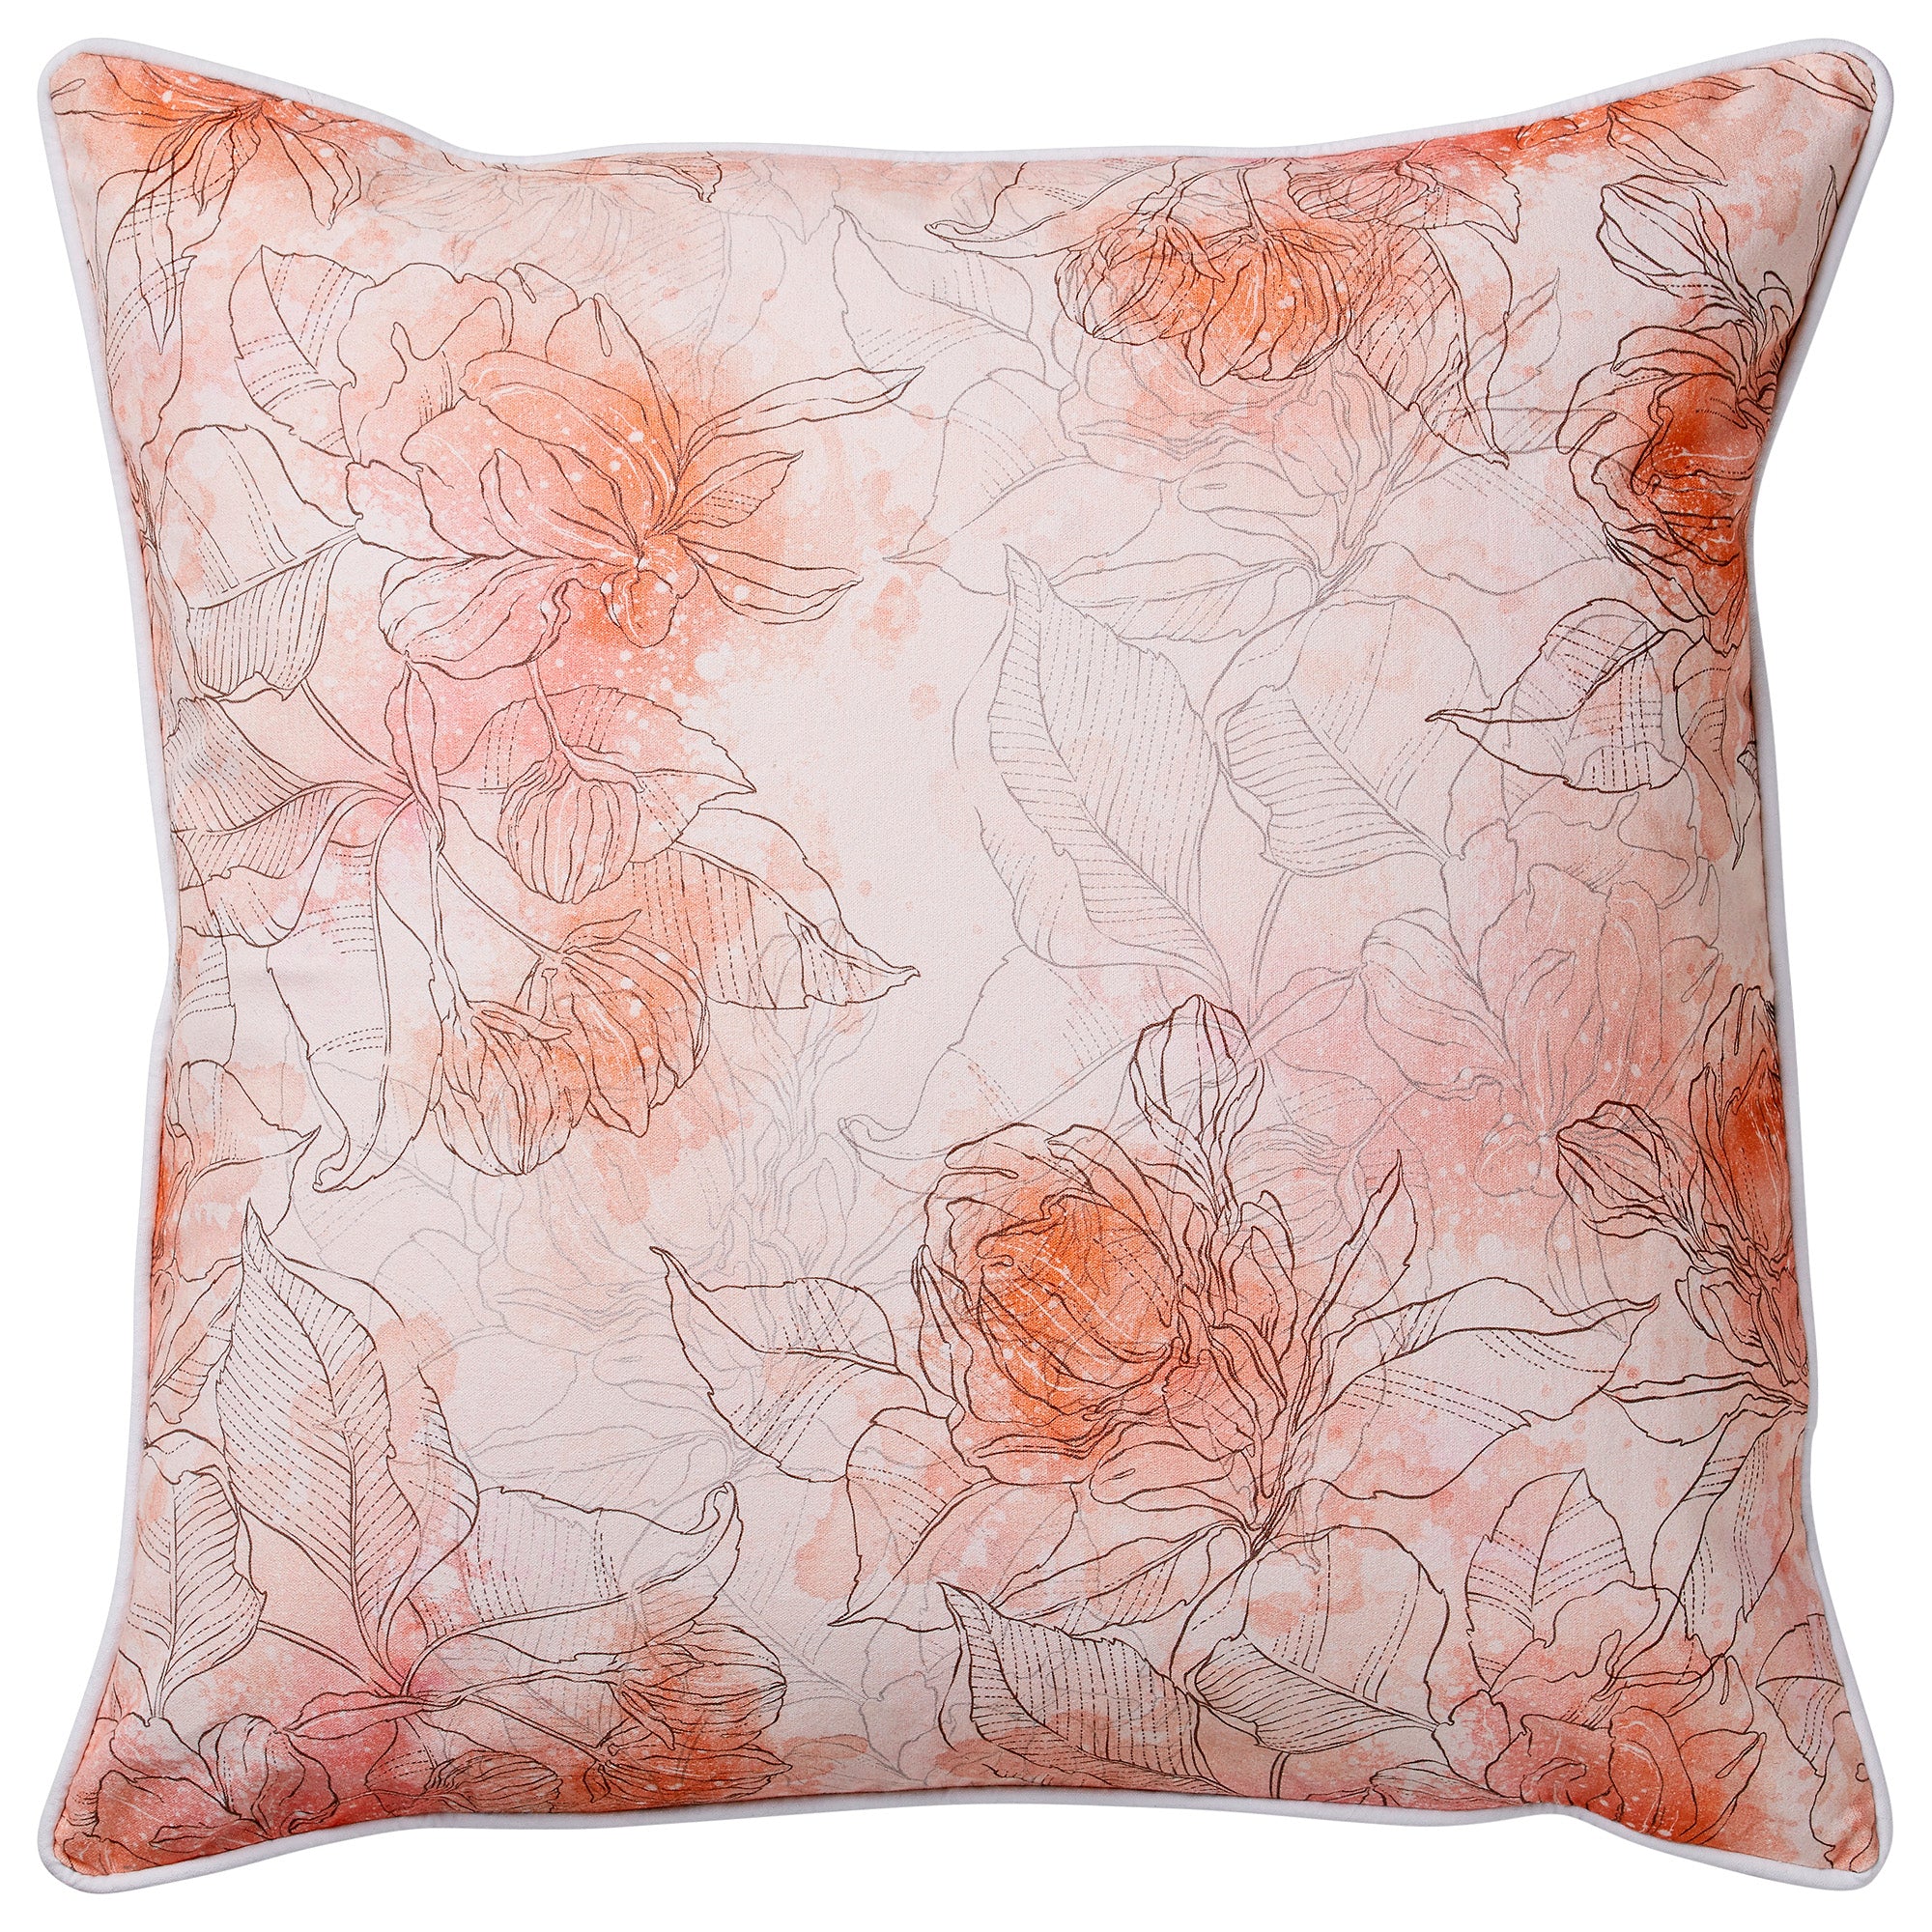 Lene Bjerre Fleur Cushion filled with Duck feathers - 60x60cm